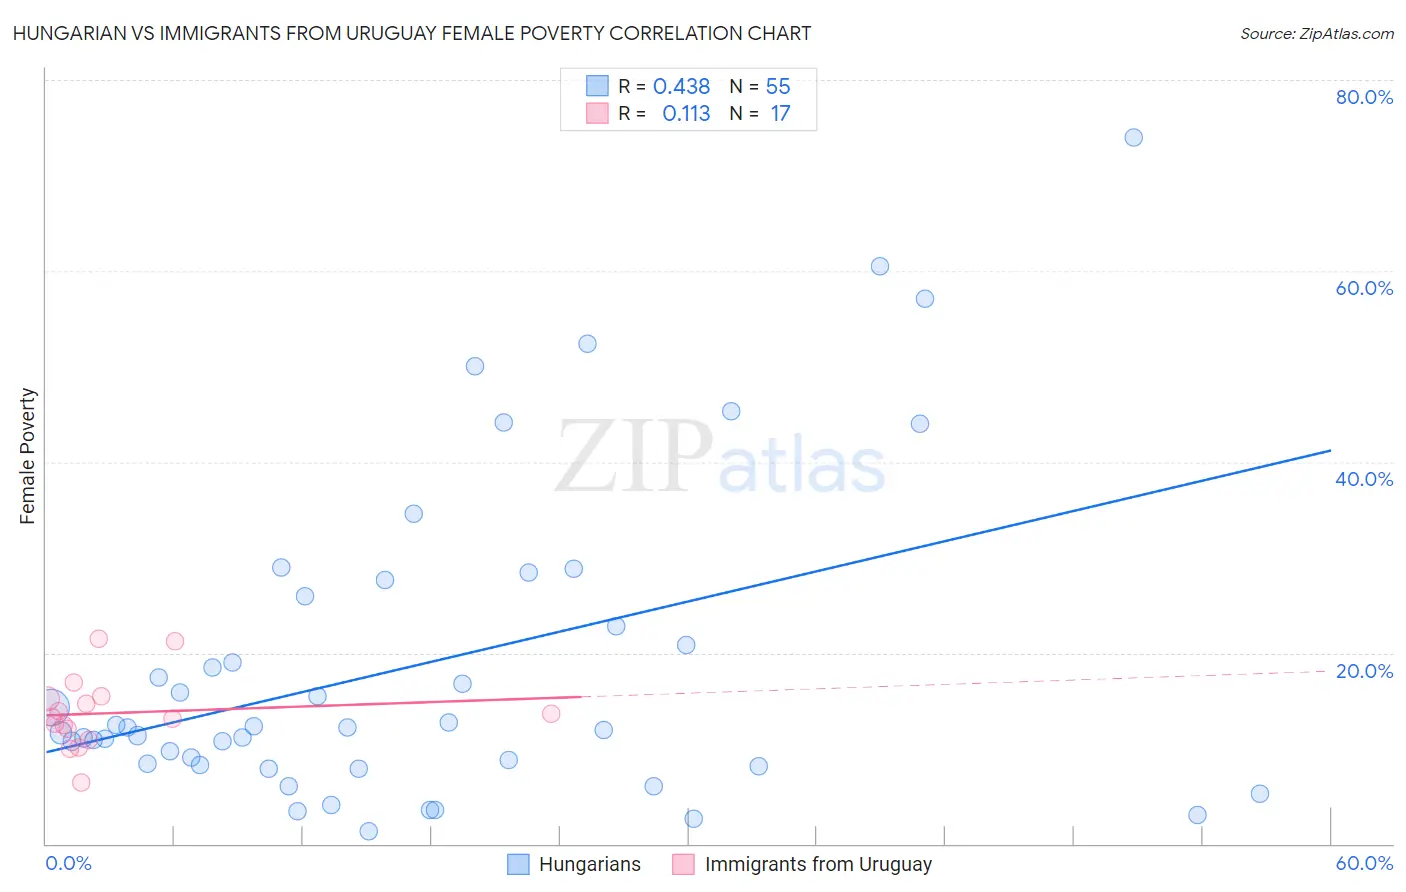 Hungarian vs Immigrants from Uruguay Female Poverty